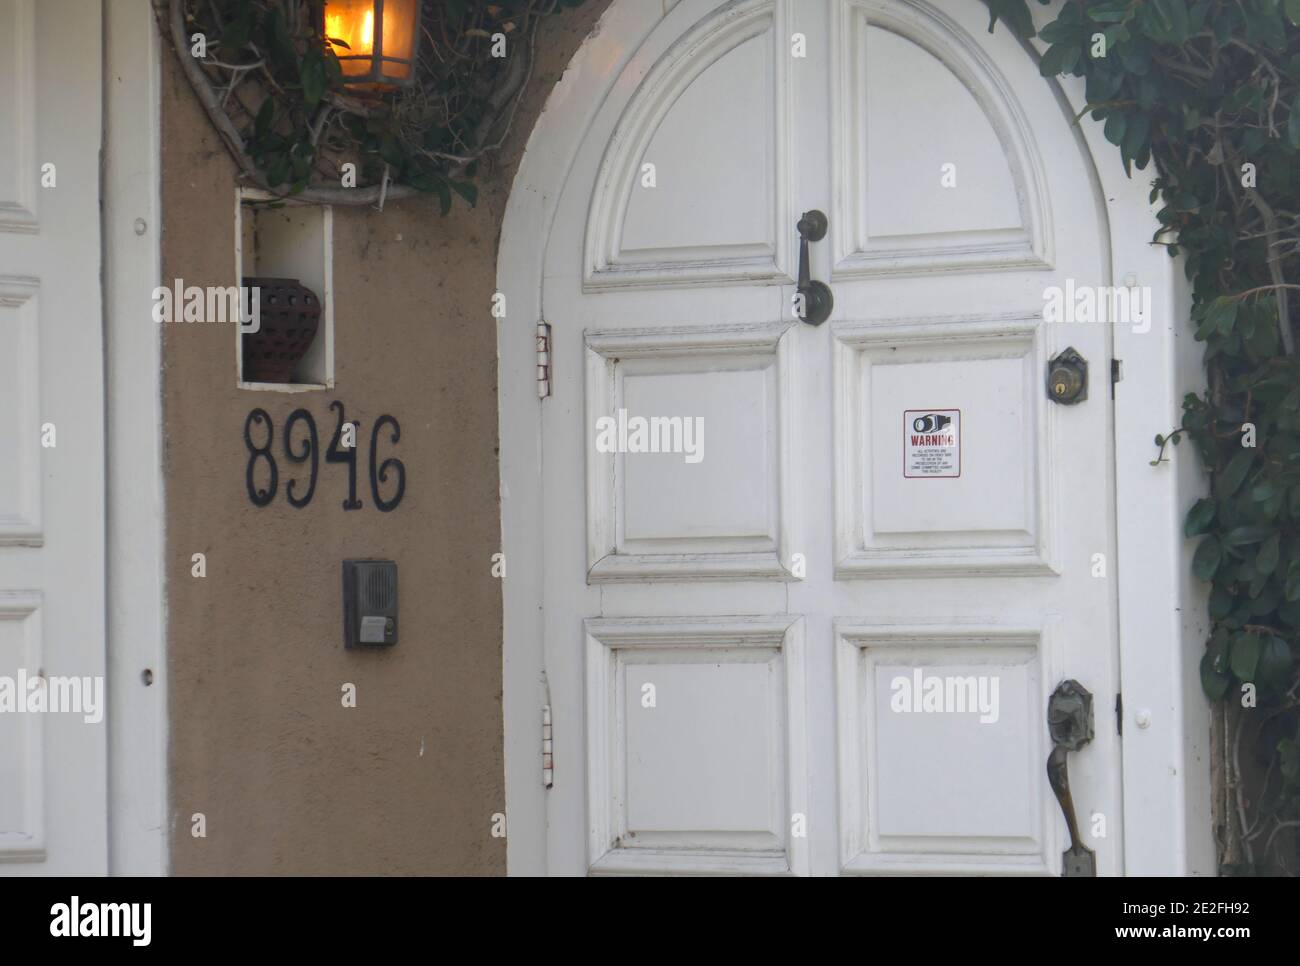 Los Angeles, California, USA 13th January 2021 A general view of atmosphere of former home/residence of actor Errol Flynn and wife actress Lili Damira at 8946 Appian Way on January 13, 2021 in Los Angeles, California, USA. Photo by Barry King/Alamy Stock Photo Stock Photo